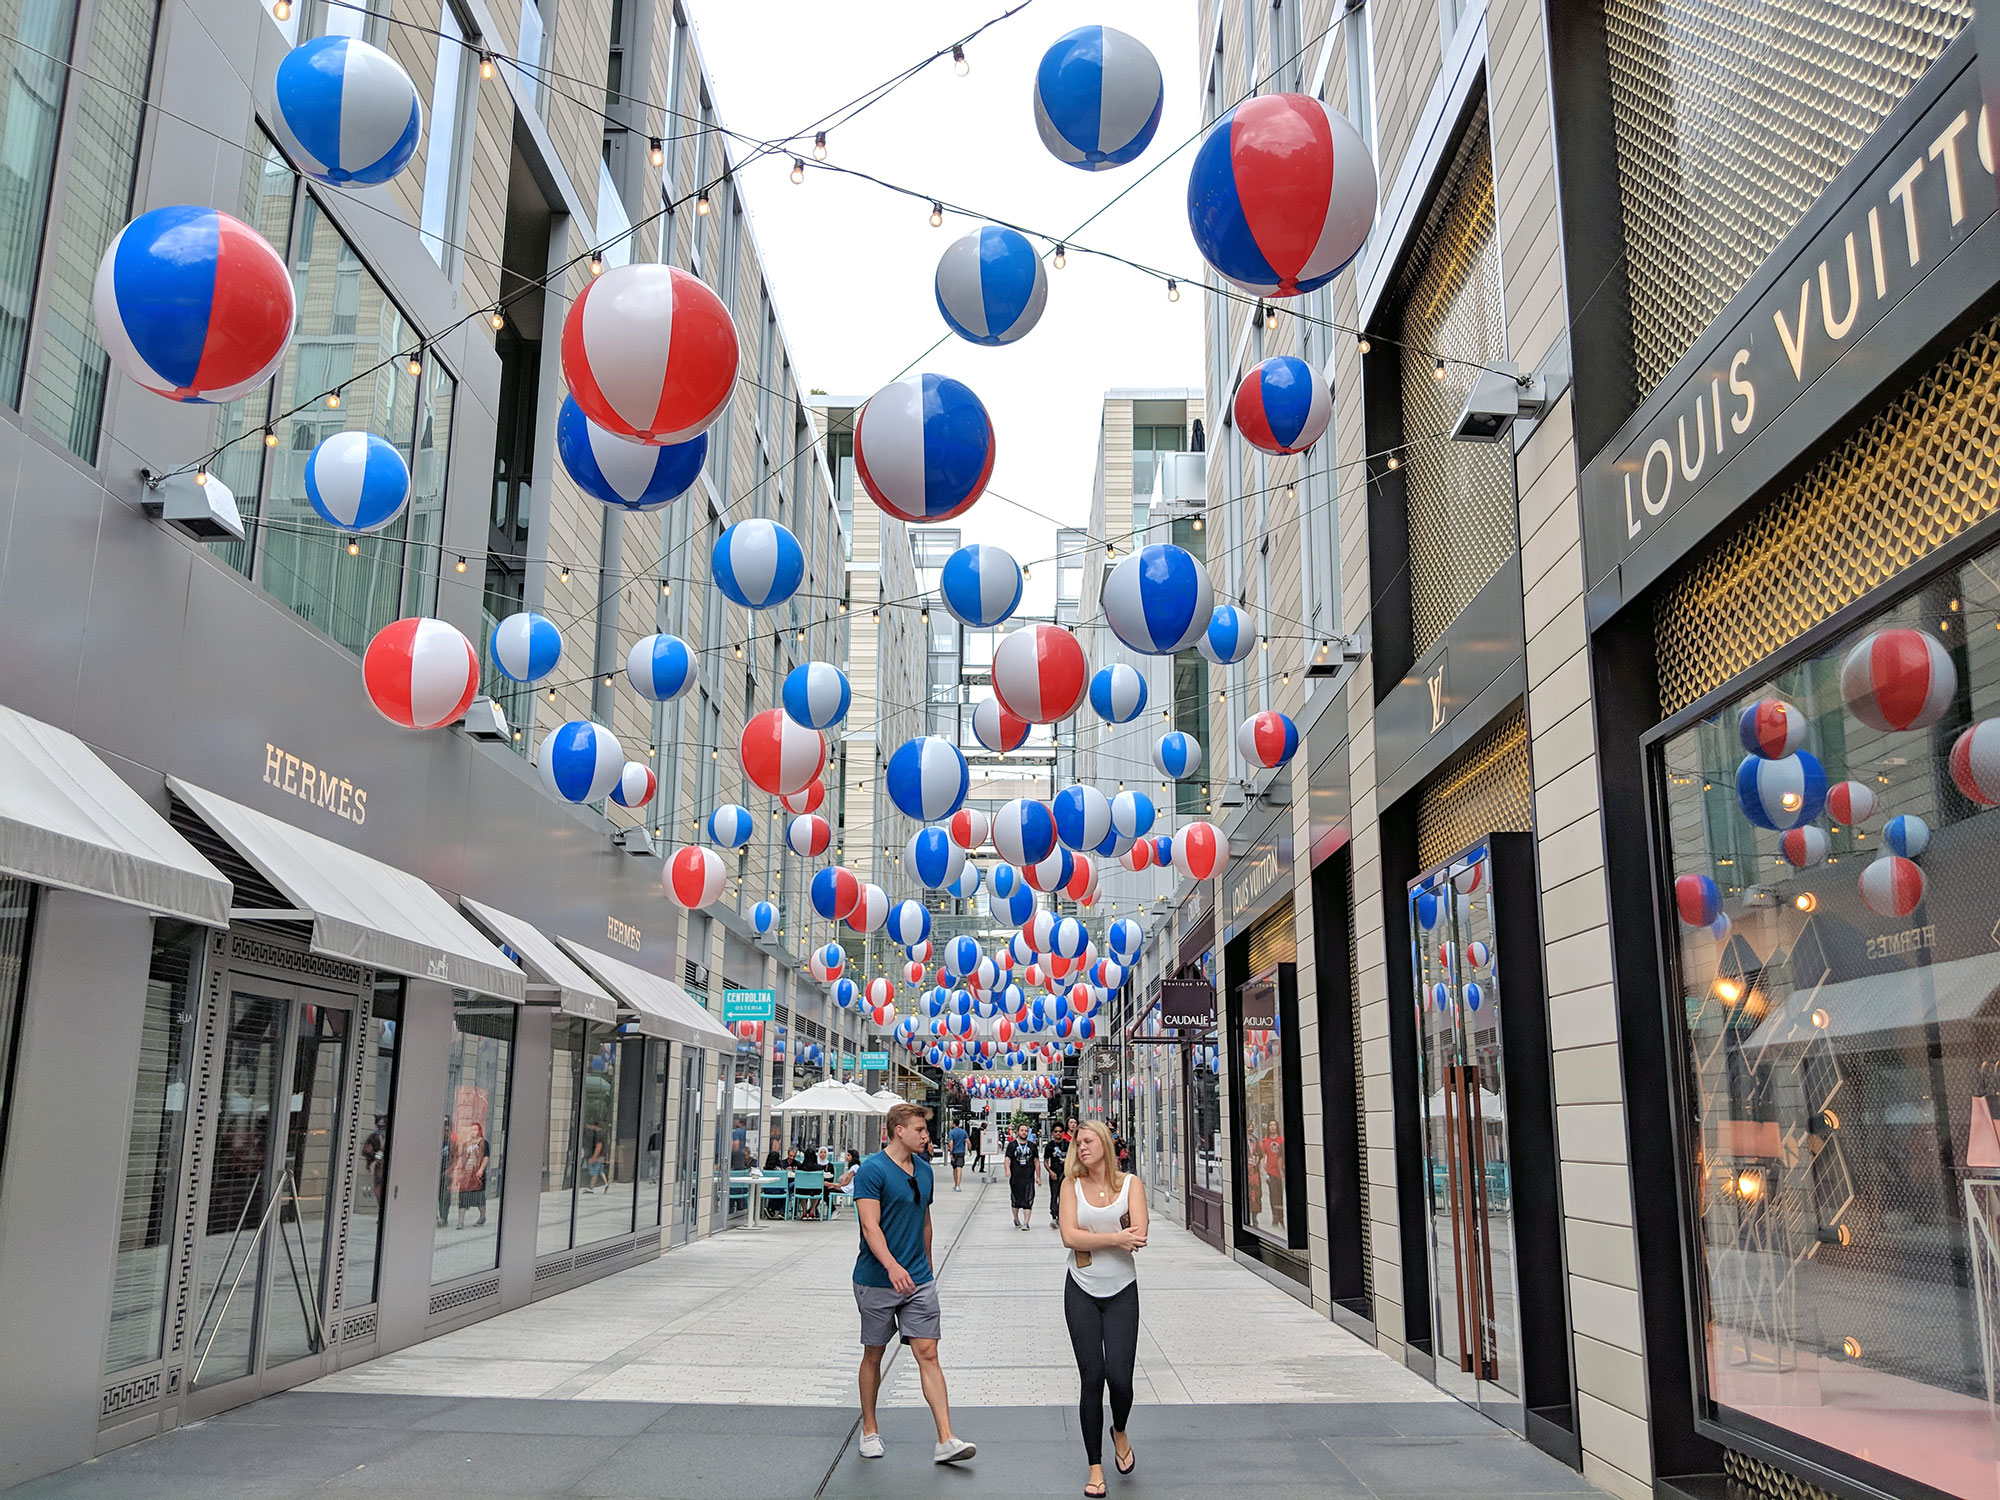 The summer balloon decorations at CityCenter D.C.